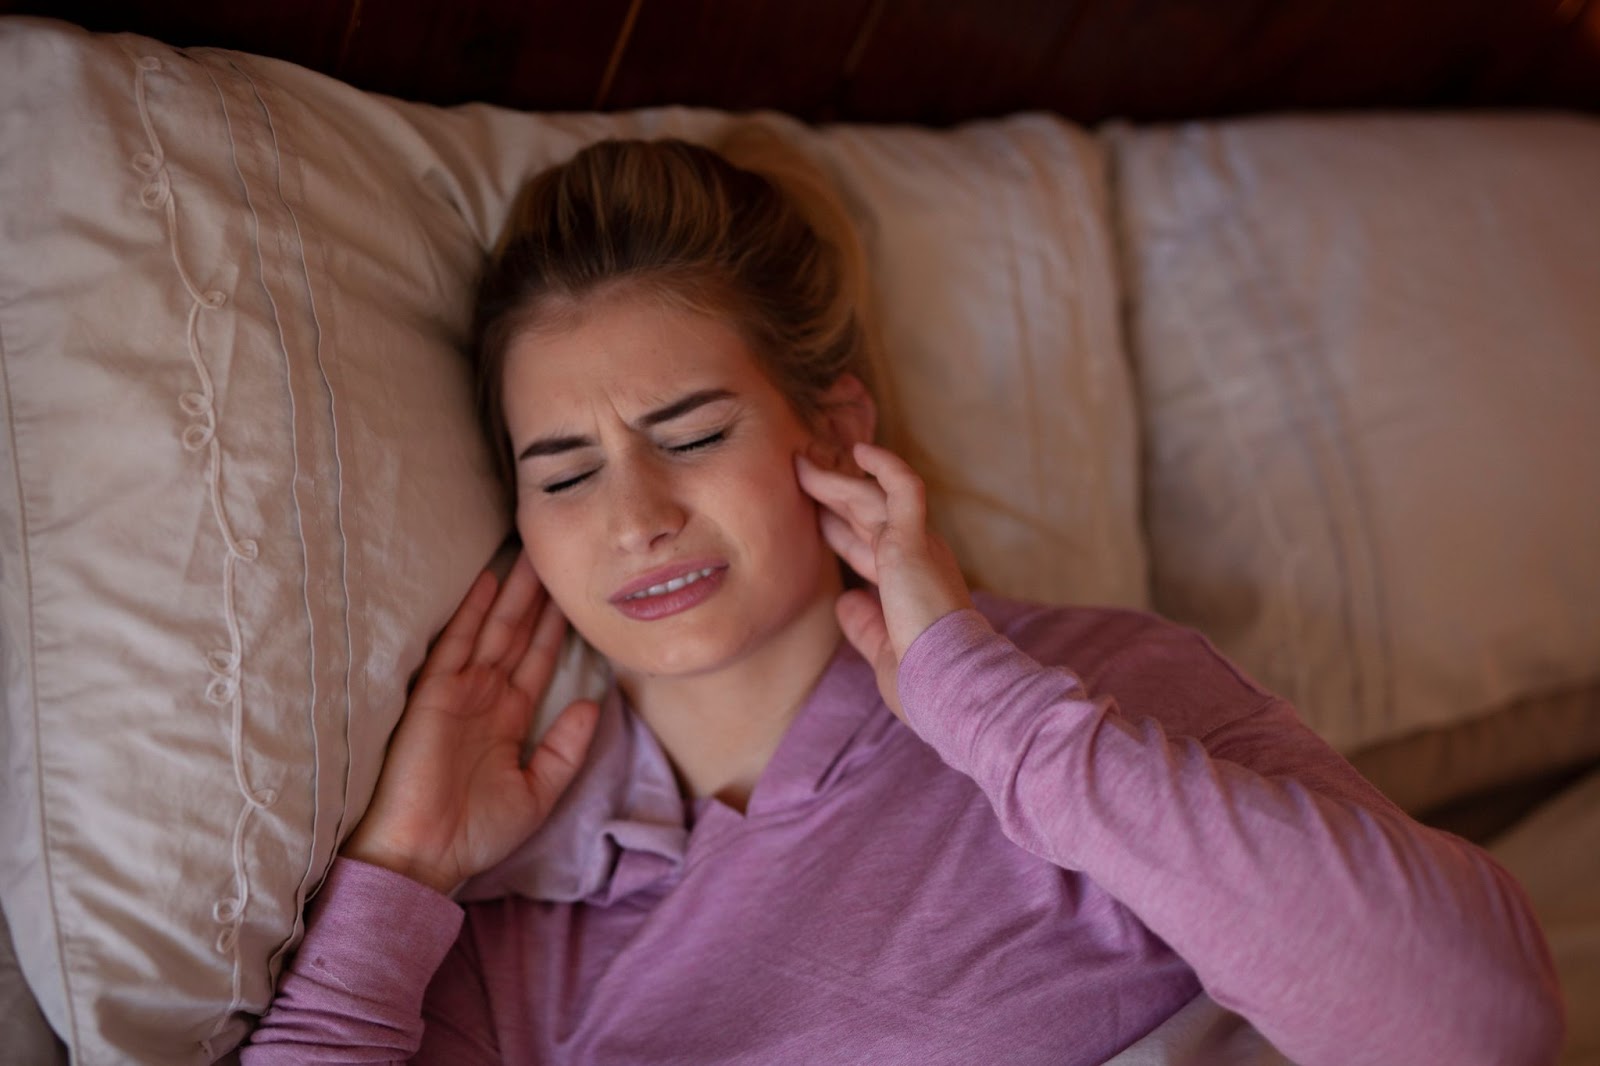 A woman in bed puts both hands on either side of her face in response to jaw pain from grinding teeth.